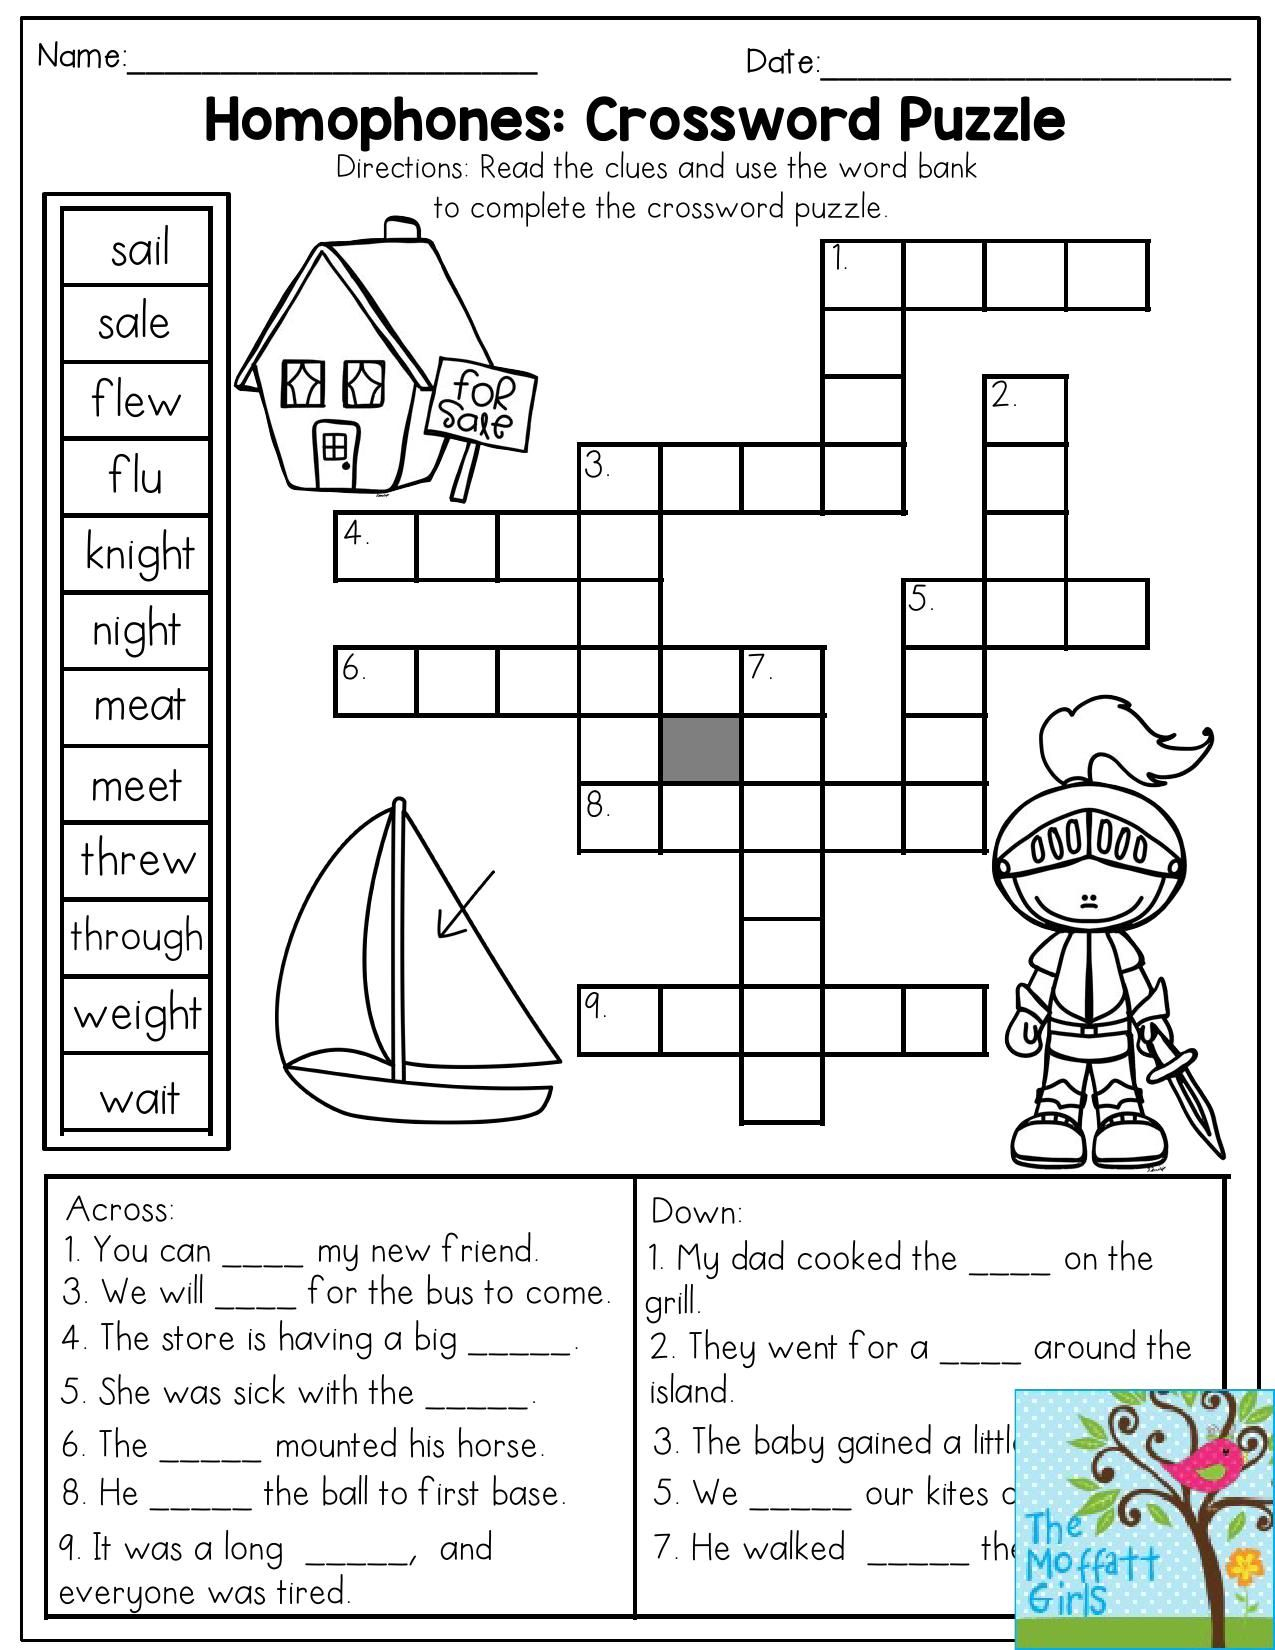 Homophones: Crossword Puzzle- Read The Clues And Use The Word Bank - 4Th Grade Crossword Puzzles Printable